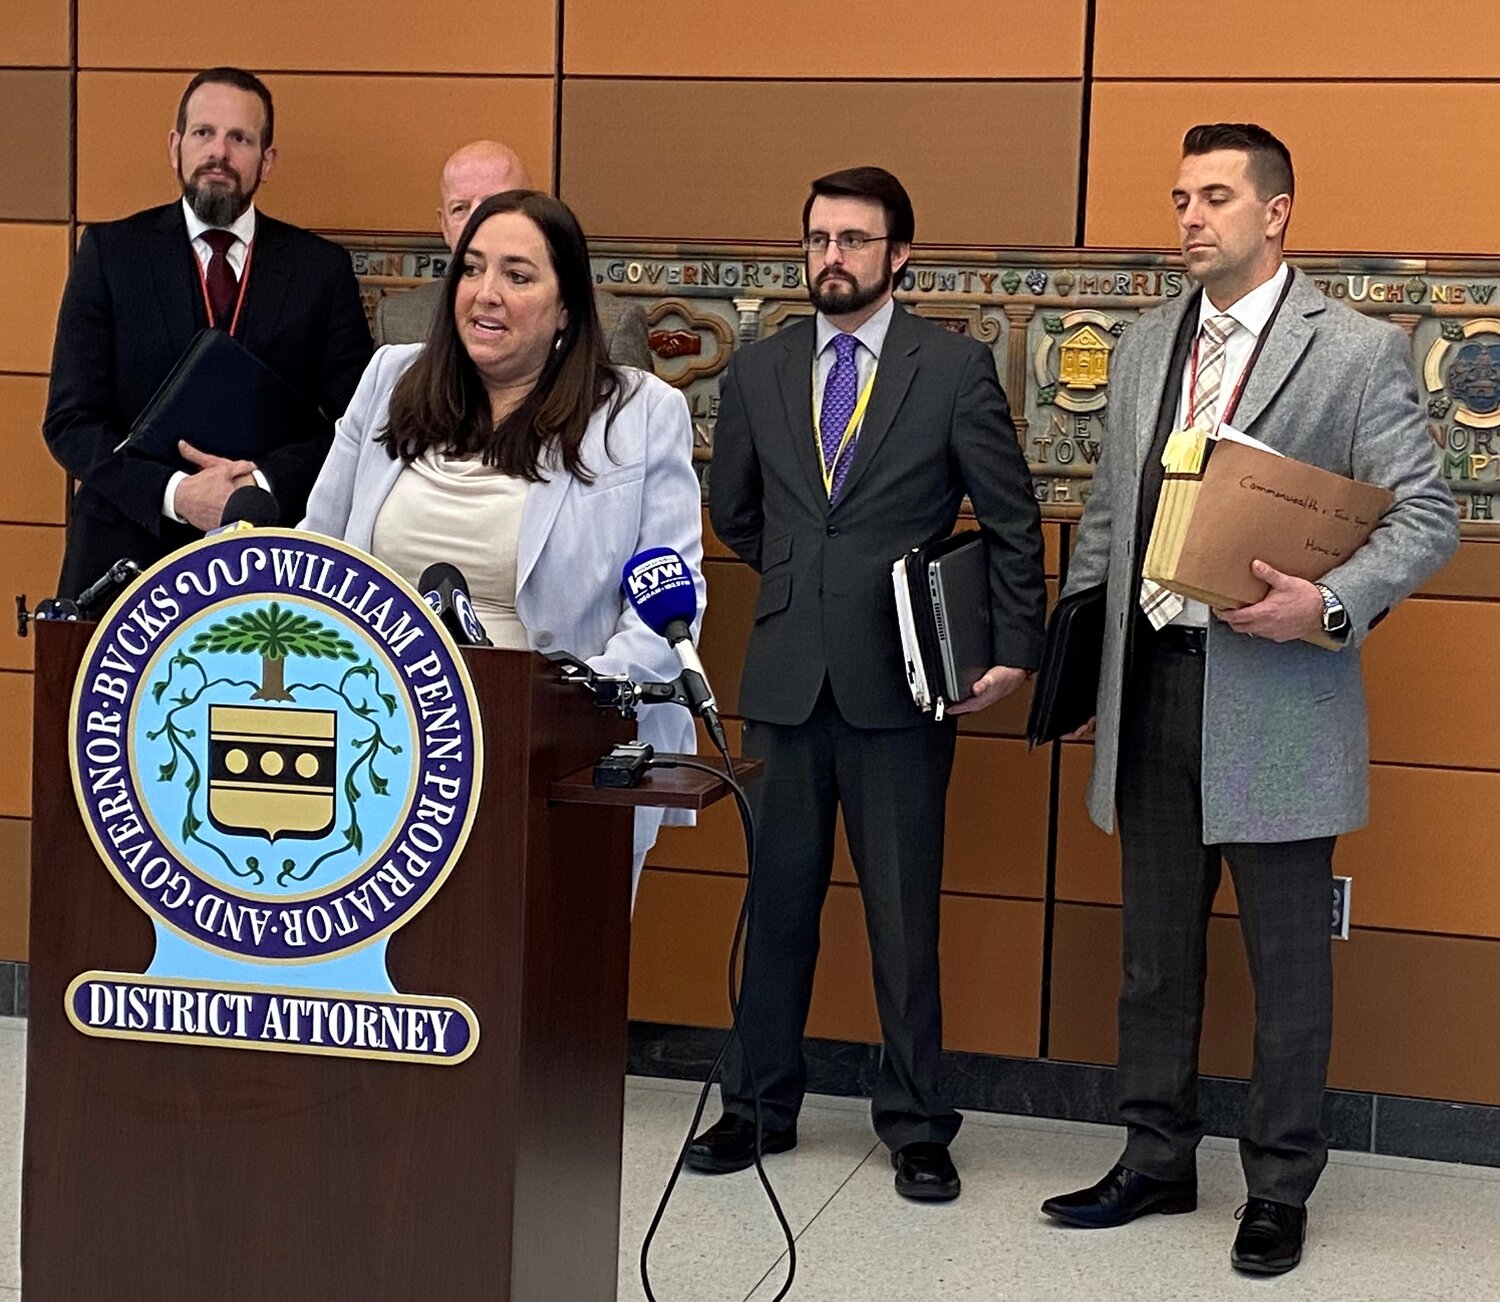 Bucks County First Assistant District Attorney Jennifer Schorn announced the life sentence for Trinh Nguyen during a press conference Wednesday. Nguyen murdered two of her sons and attempted to kill their cousin on May 2, 2022 in their Upper Makefield home.